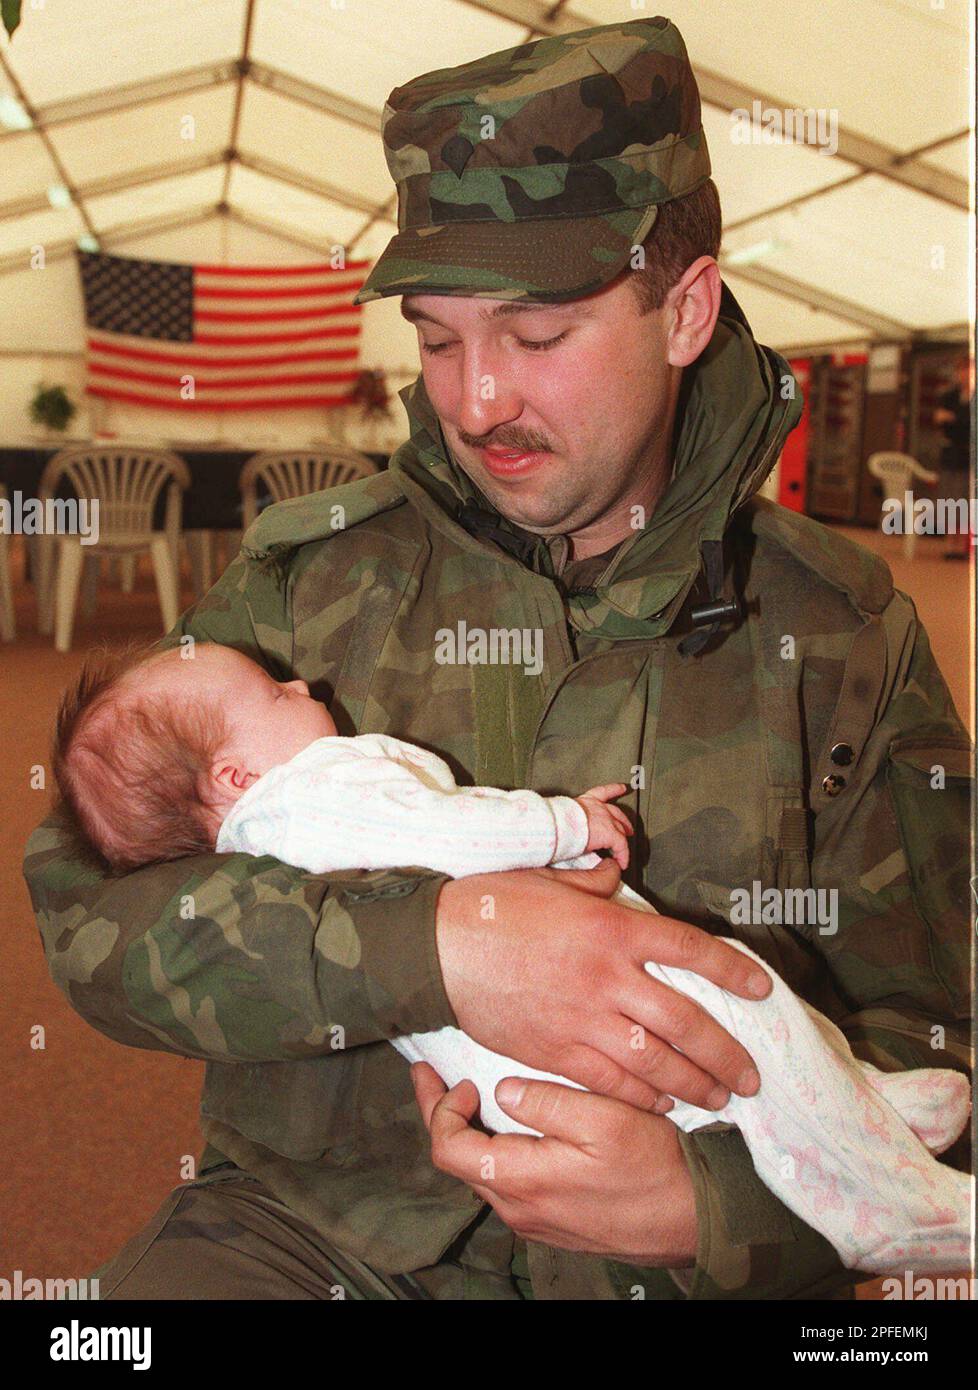 U.S. Army Spec. Russel Mills of Suffield, Conn., holds his baby Sydney, who was born one month and three days ago, at Rhein-Main Airport in Frankfurt, Germany, on Monday, April 15, 1996. Mills is seeing his baby for the first time in person since he was deployed with U. S. troops to Bosnia. About 135 U.S. soldiers arrived for two week break after they spent between four and five months in Bosnia. (AP Photo/Heribert Proepper) Banque D'Images